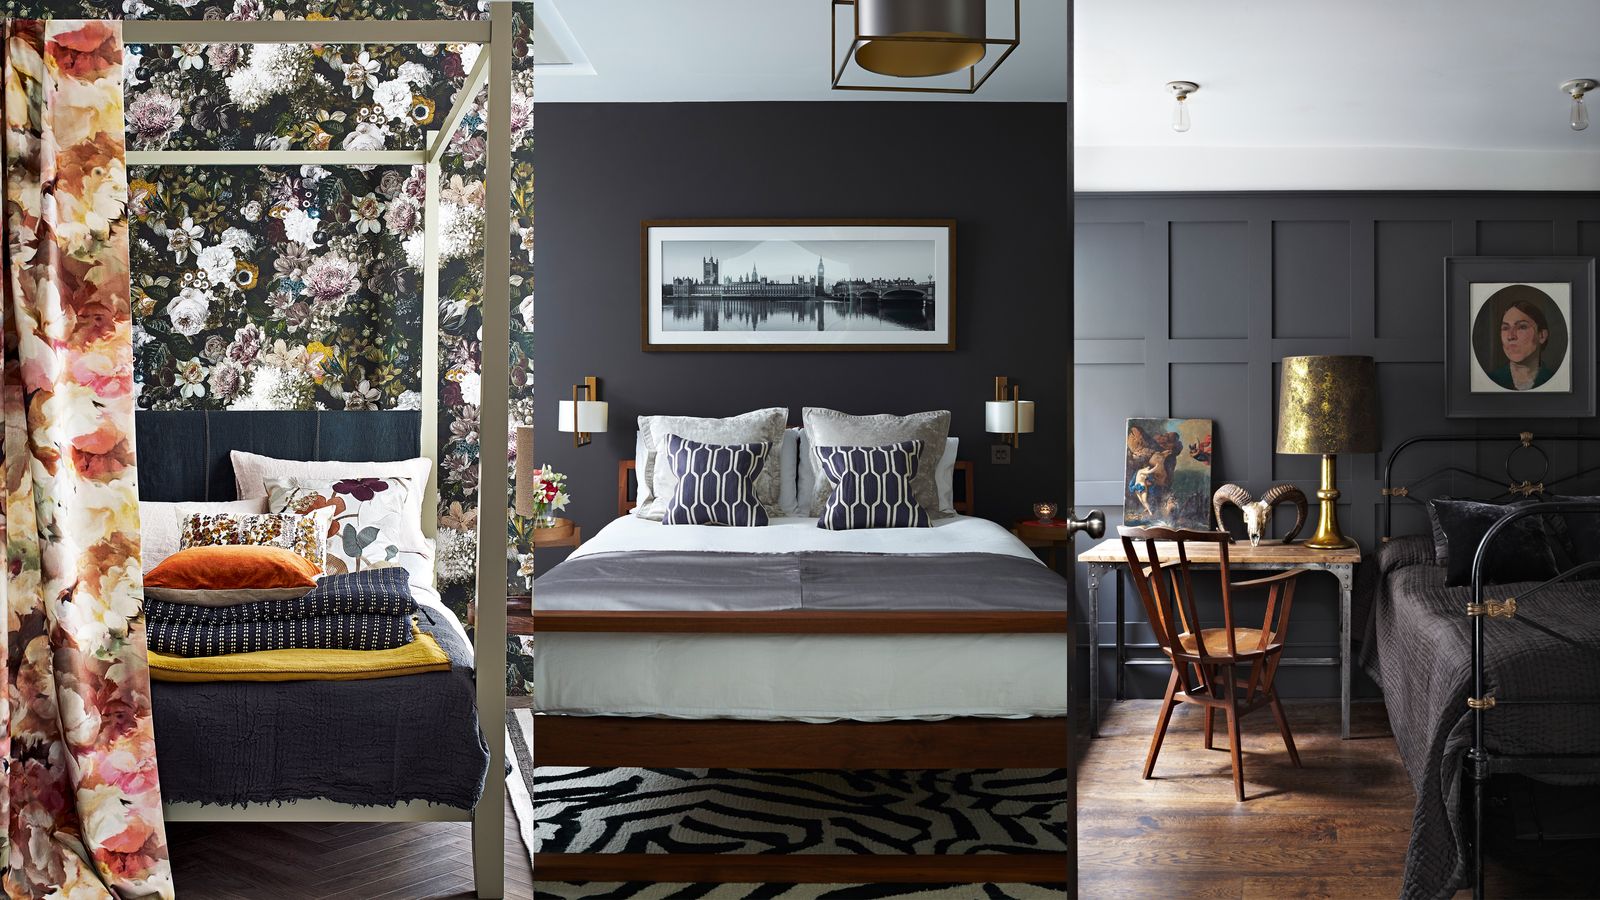 Black bedroom ideas: 12 ways to use the dark color in your room